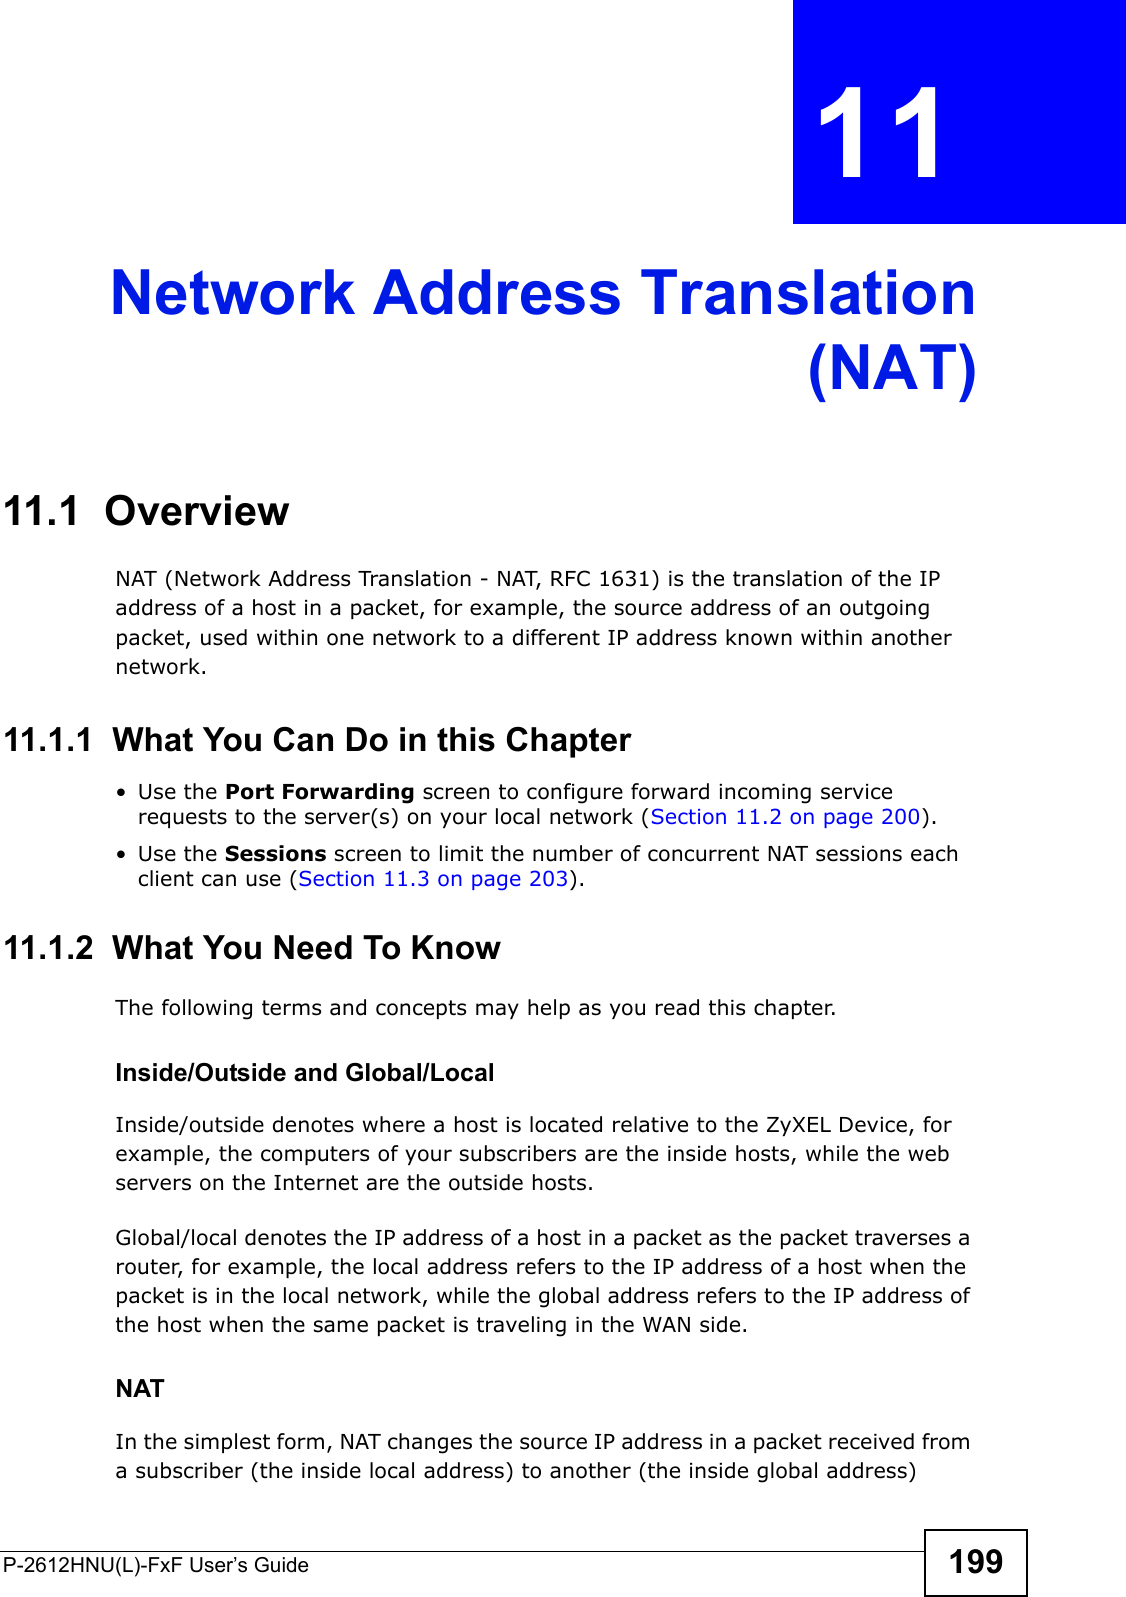 P-2612HNU(L)-FxF User’s Guide 199CHAPTER   11Network Address Translation(NAT)11.1  Overview NAT (Network Address Translation - NAT, RFC 1631) is the translation of the IP address of a host in a packet, for example, the source address of an outgoing packet, used within one network to a different IP address known within another network.11.1.1  What You Can Do in this Chapter• Use the Port Forwarding screen to configure forward incoming service requests to the server(s) on your local network (Section 11.2 on page 200).• Use the Sessions screen to limit the number of concurrent NAT sessions each client can use (Section 11.3 on page 203).11.1.2  What You Need To KnowThe following terms and concepts may help as you read this chapter.Inside/Outside and Global/LocalInside/outside denotes where a host is located relative to the ZyXEL Device, for example, the computers of your subscribers are the inside hosts, while the web servers on the Internet are the outside hosts. Global/local denotes the IP address of a host in a packet as the packet traverses a router, for example, the local address refers to the IP address of a host when the packet is in the local network, while the global address refers to the IP address of the host when the same packet is traveling in the WAN side.NATIn the simplest form, NAT changes the source IP address in a packet received froma subscriber (the inside local address) to another (the inside global address) 